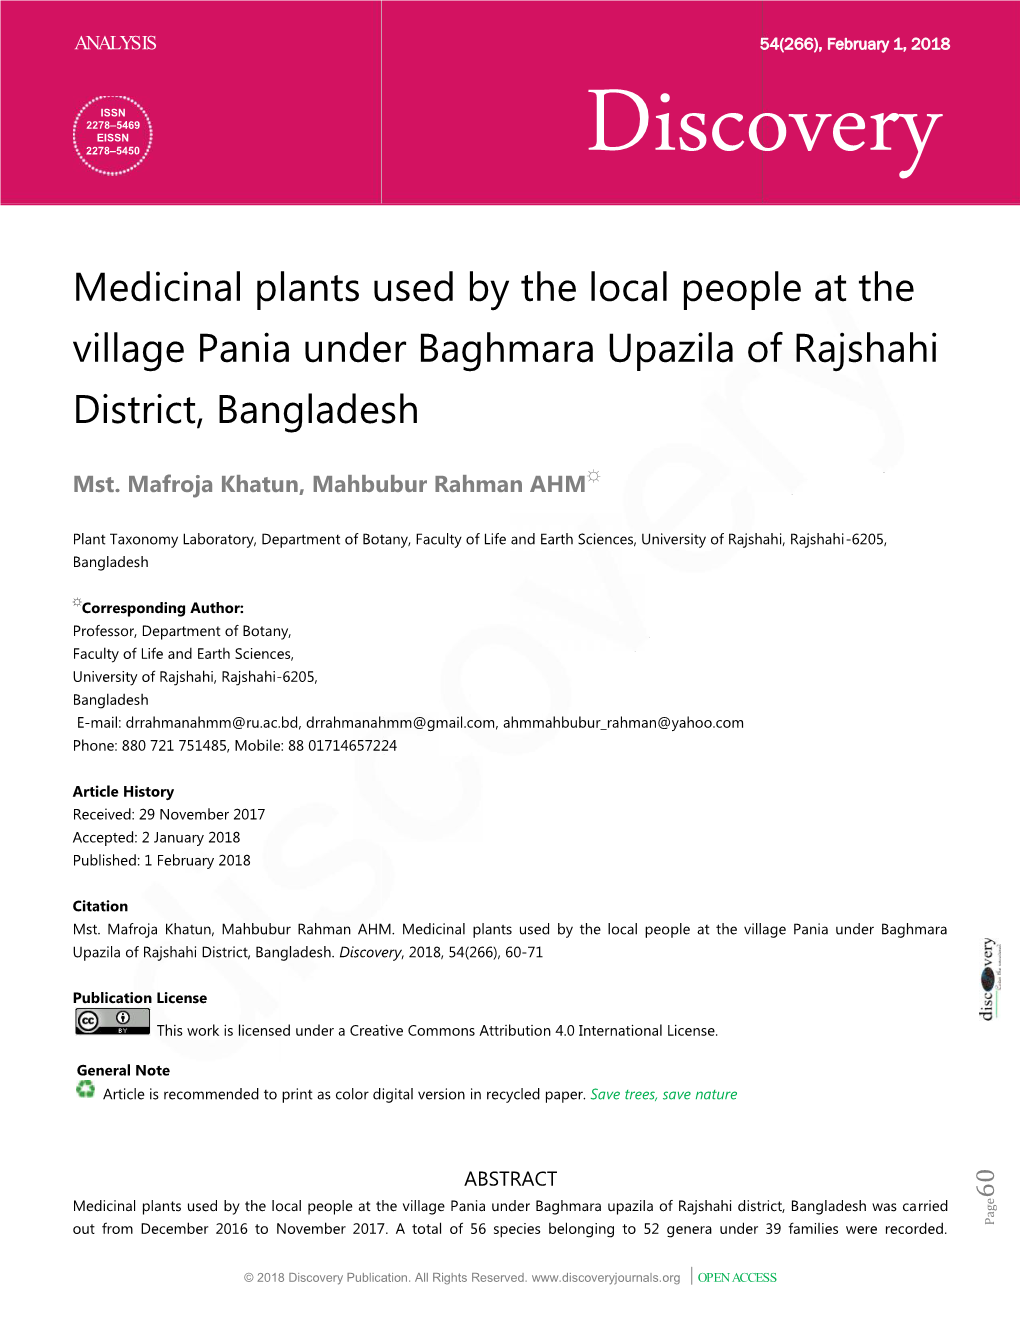 Medicinal Plants Used by the Village Pania Under Baghmara District